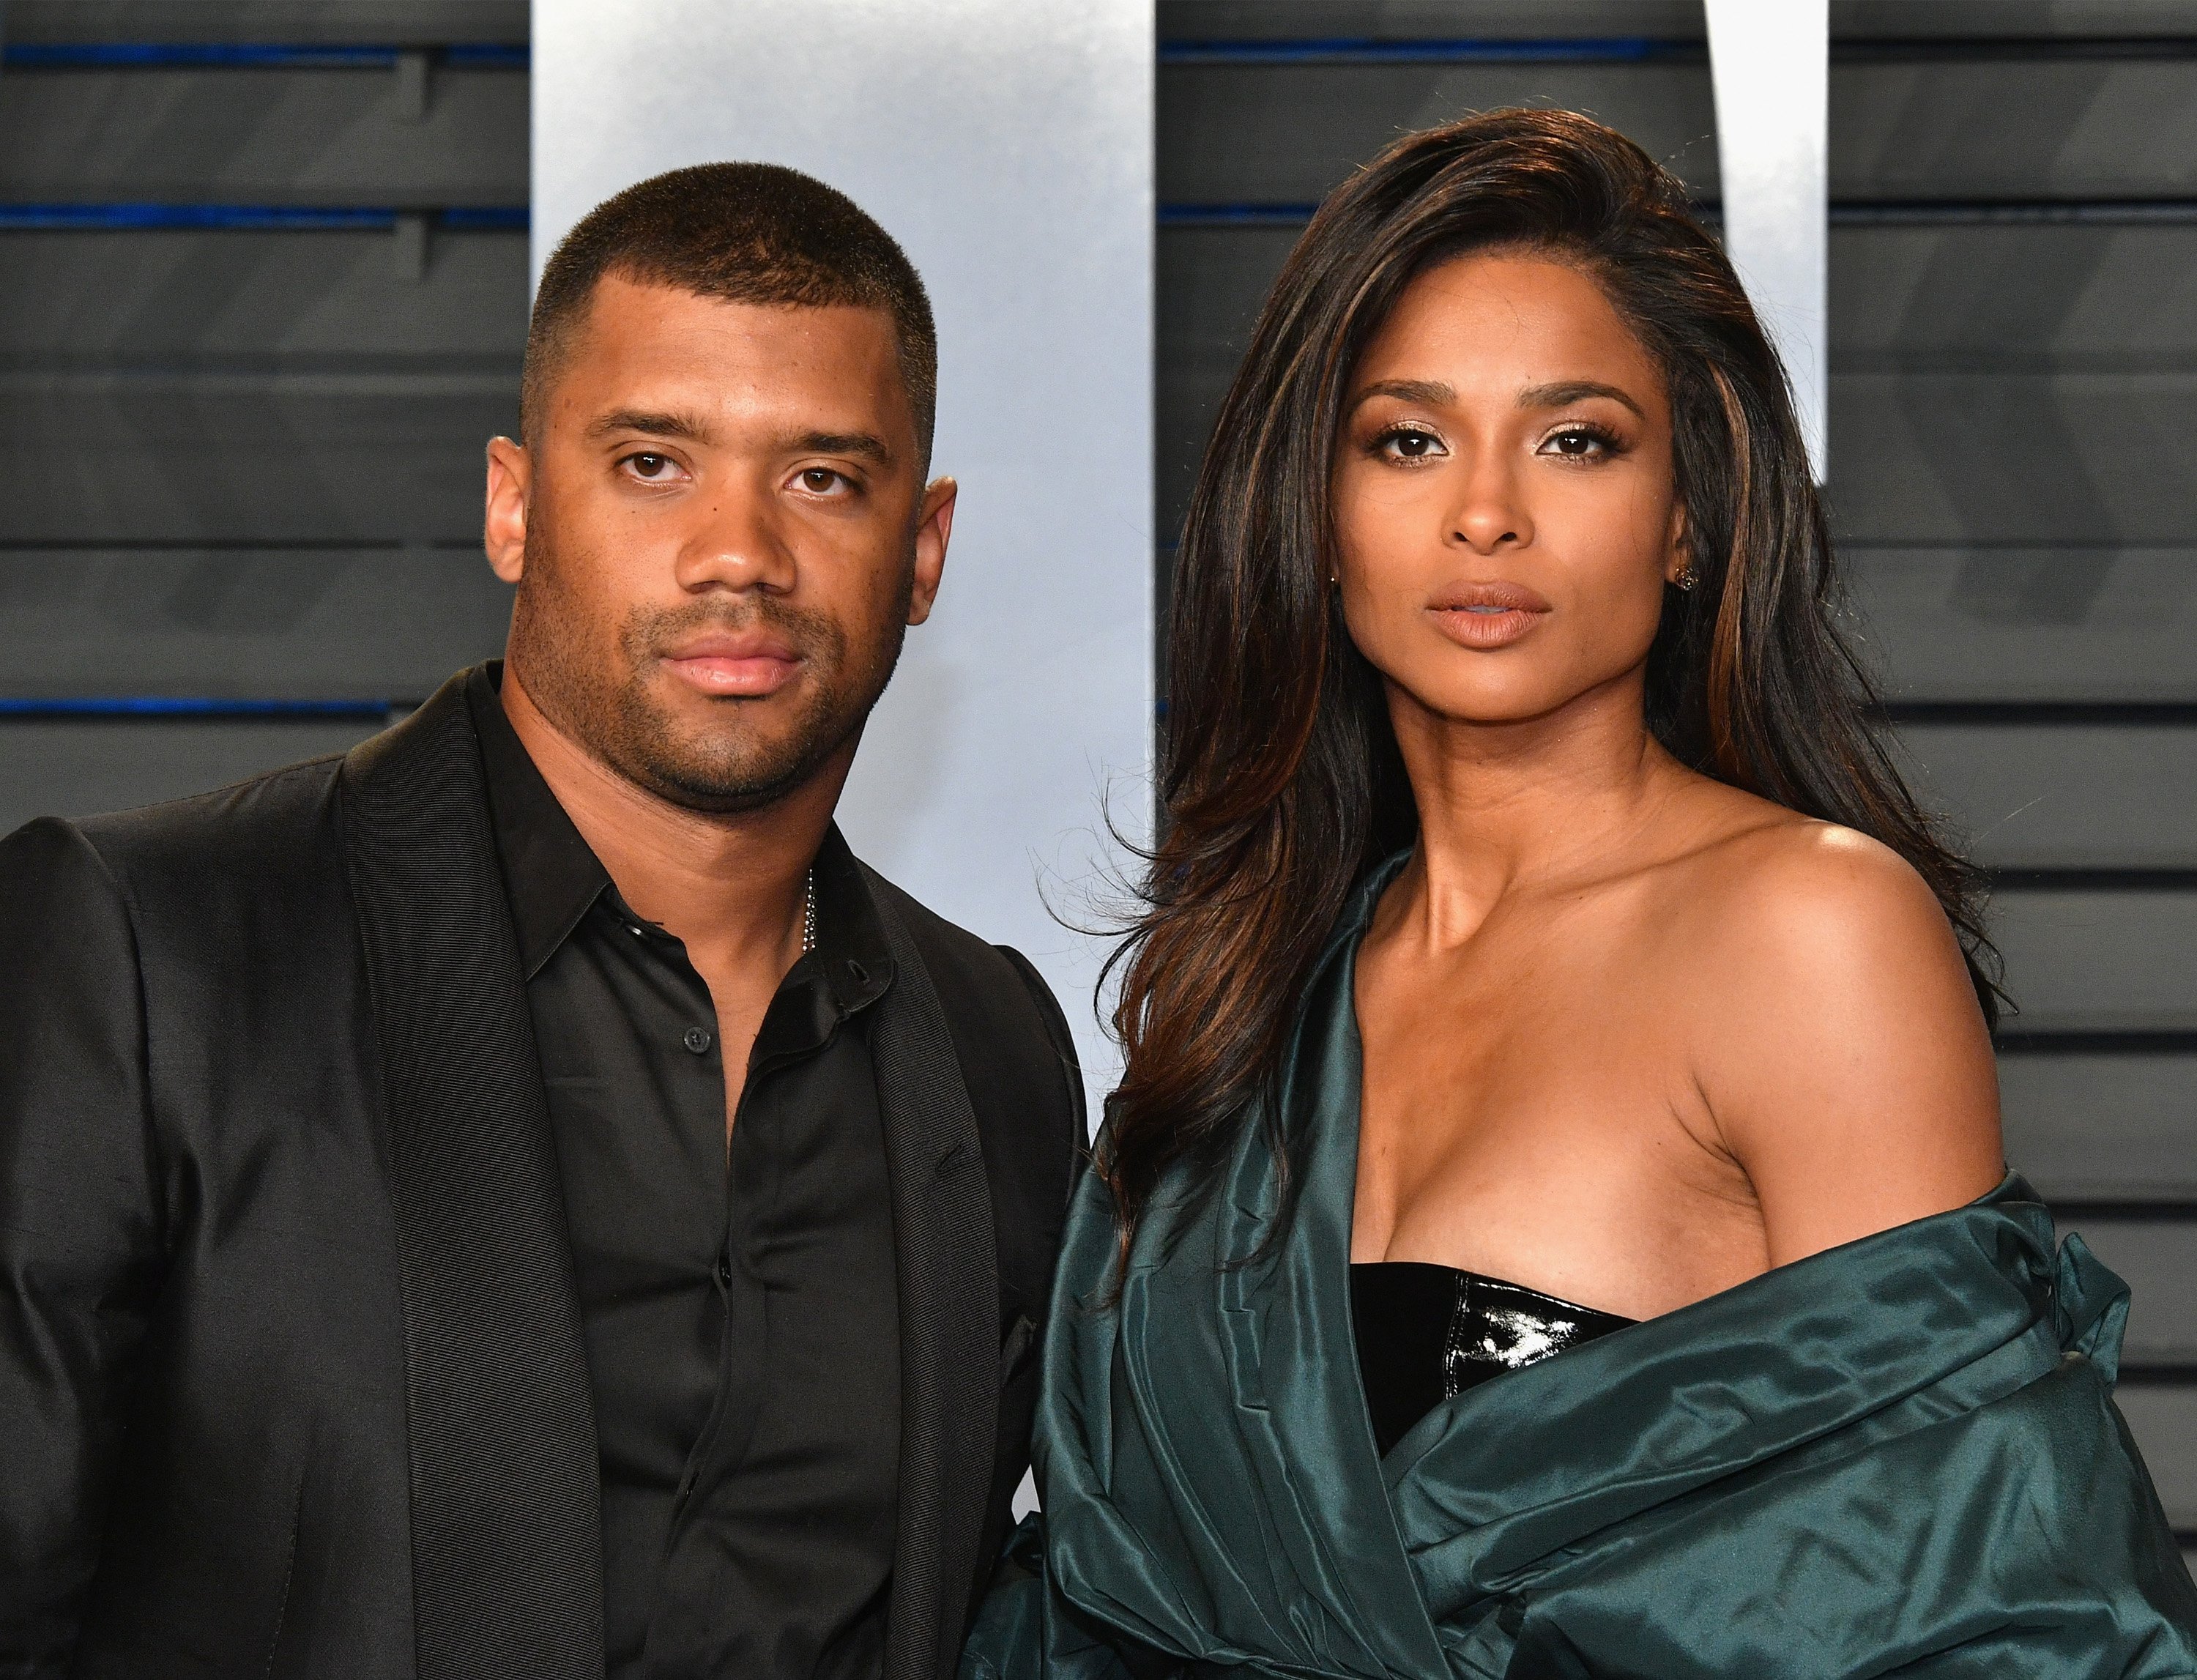 Russell and Ciara Wilson at the 2018 Vanity Fair Oscar Party at Wallis Annenberg Center for the Performing Arts on March 4, 2018 in Beverly Hills, California  | Photo: Getty Images